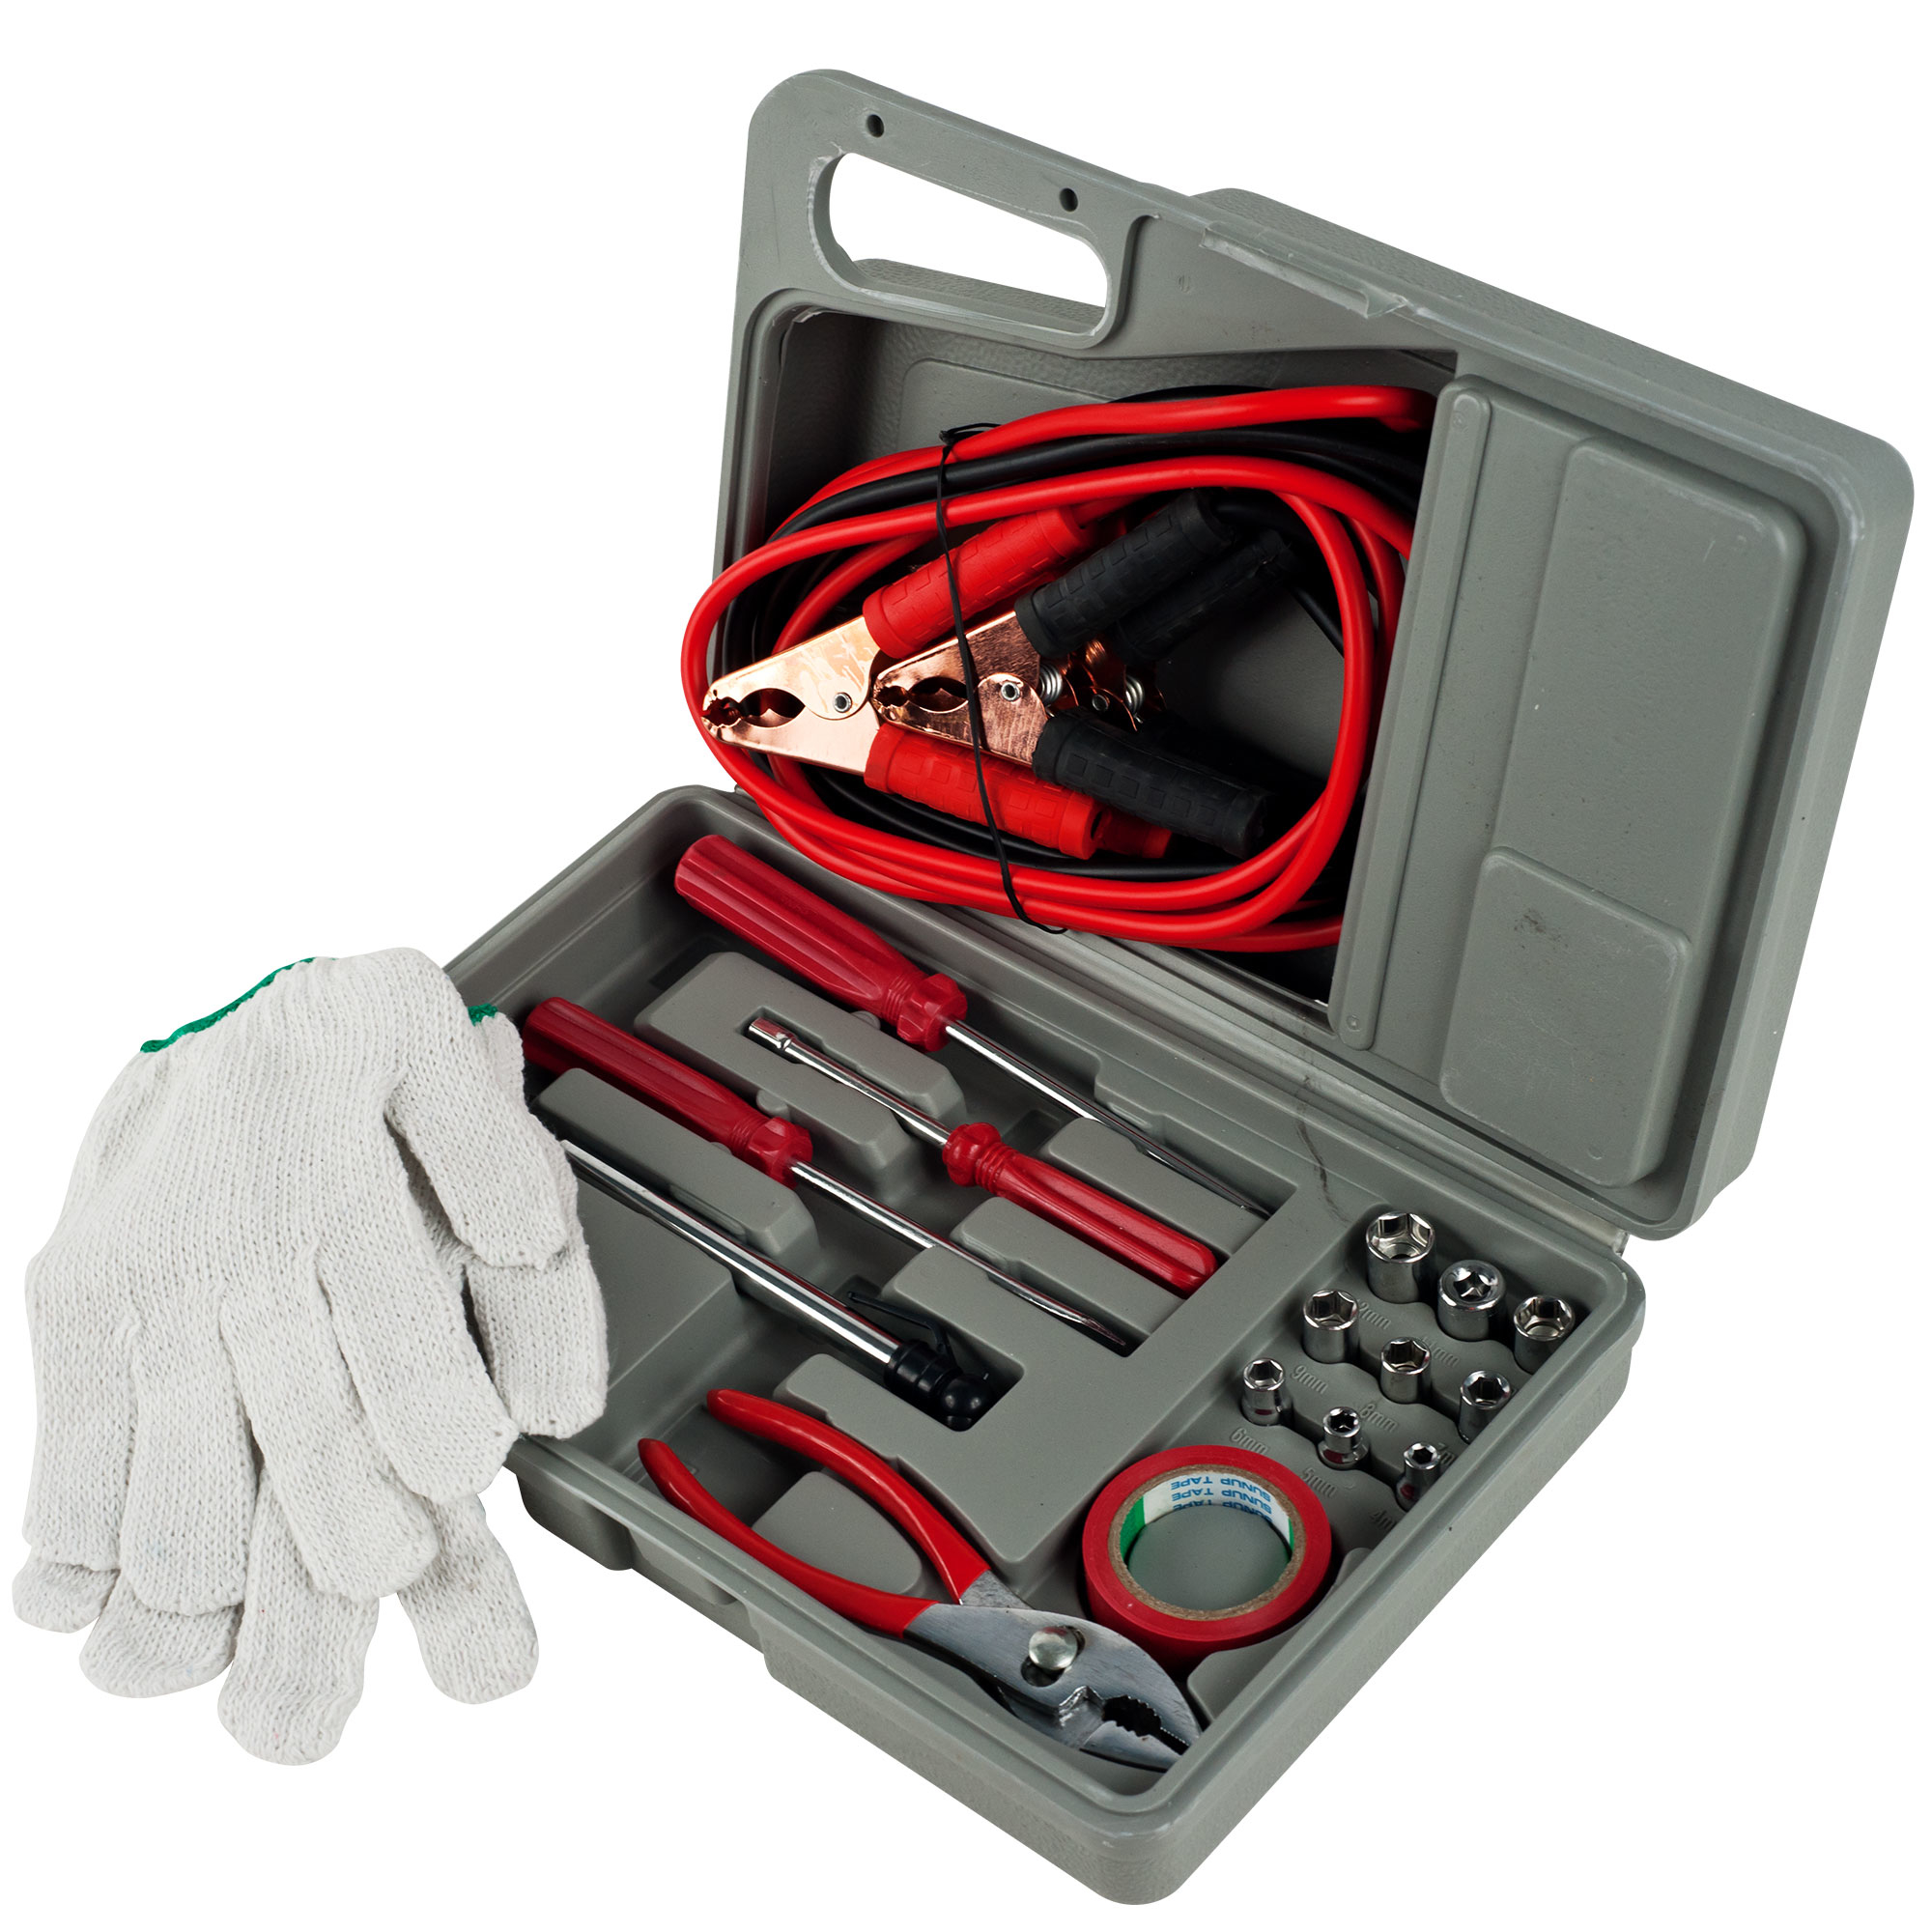 Roadside Emergency Tool and Auto Kit - 30 Pieces